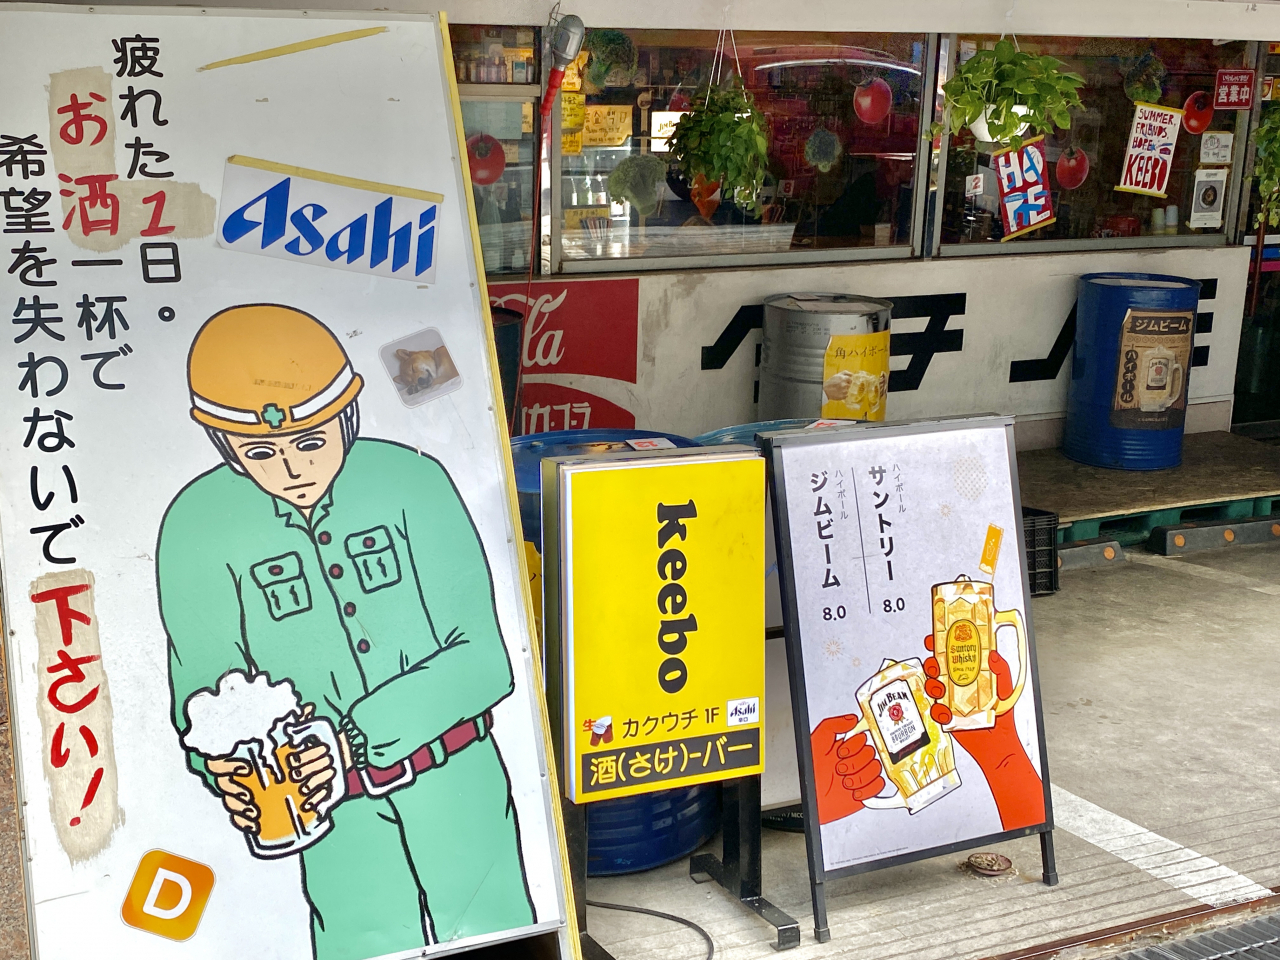 Japanese-style signs are displayed in front of casual Japanese diner Keebo in the Yongnidan-gil area, Yongsan-gu, Seoul. (Hwang Joo-young/The Korea Herald)